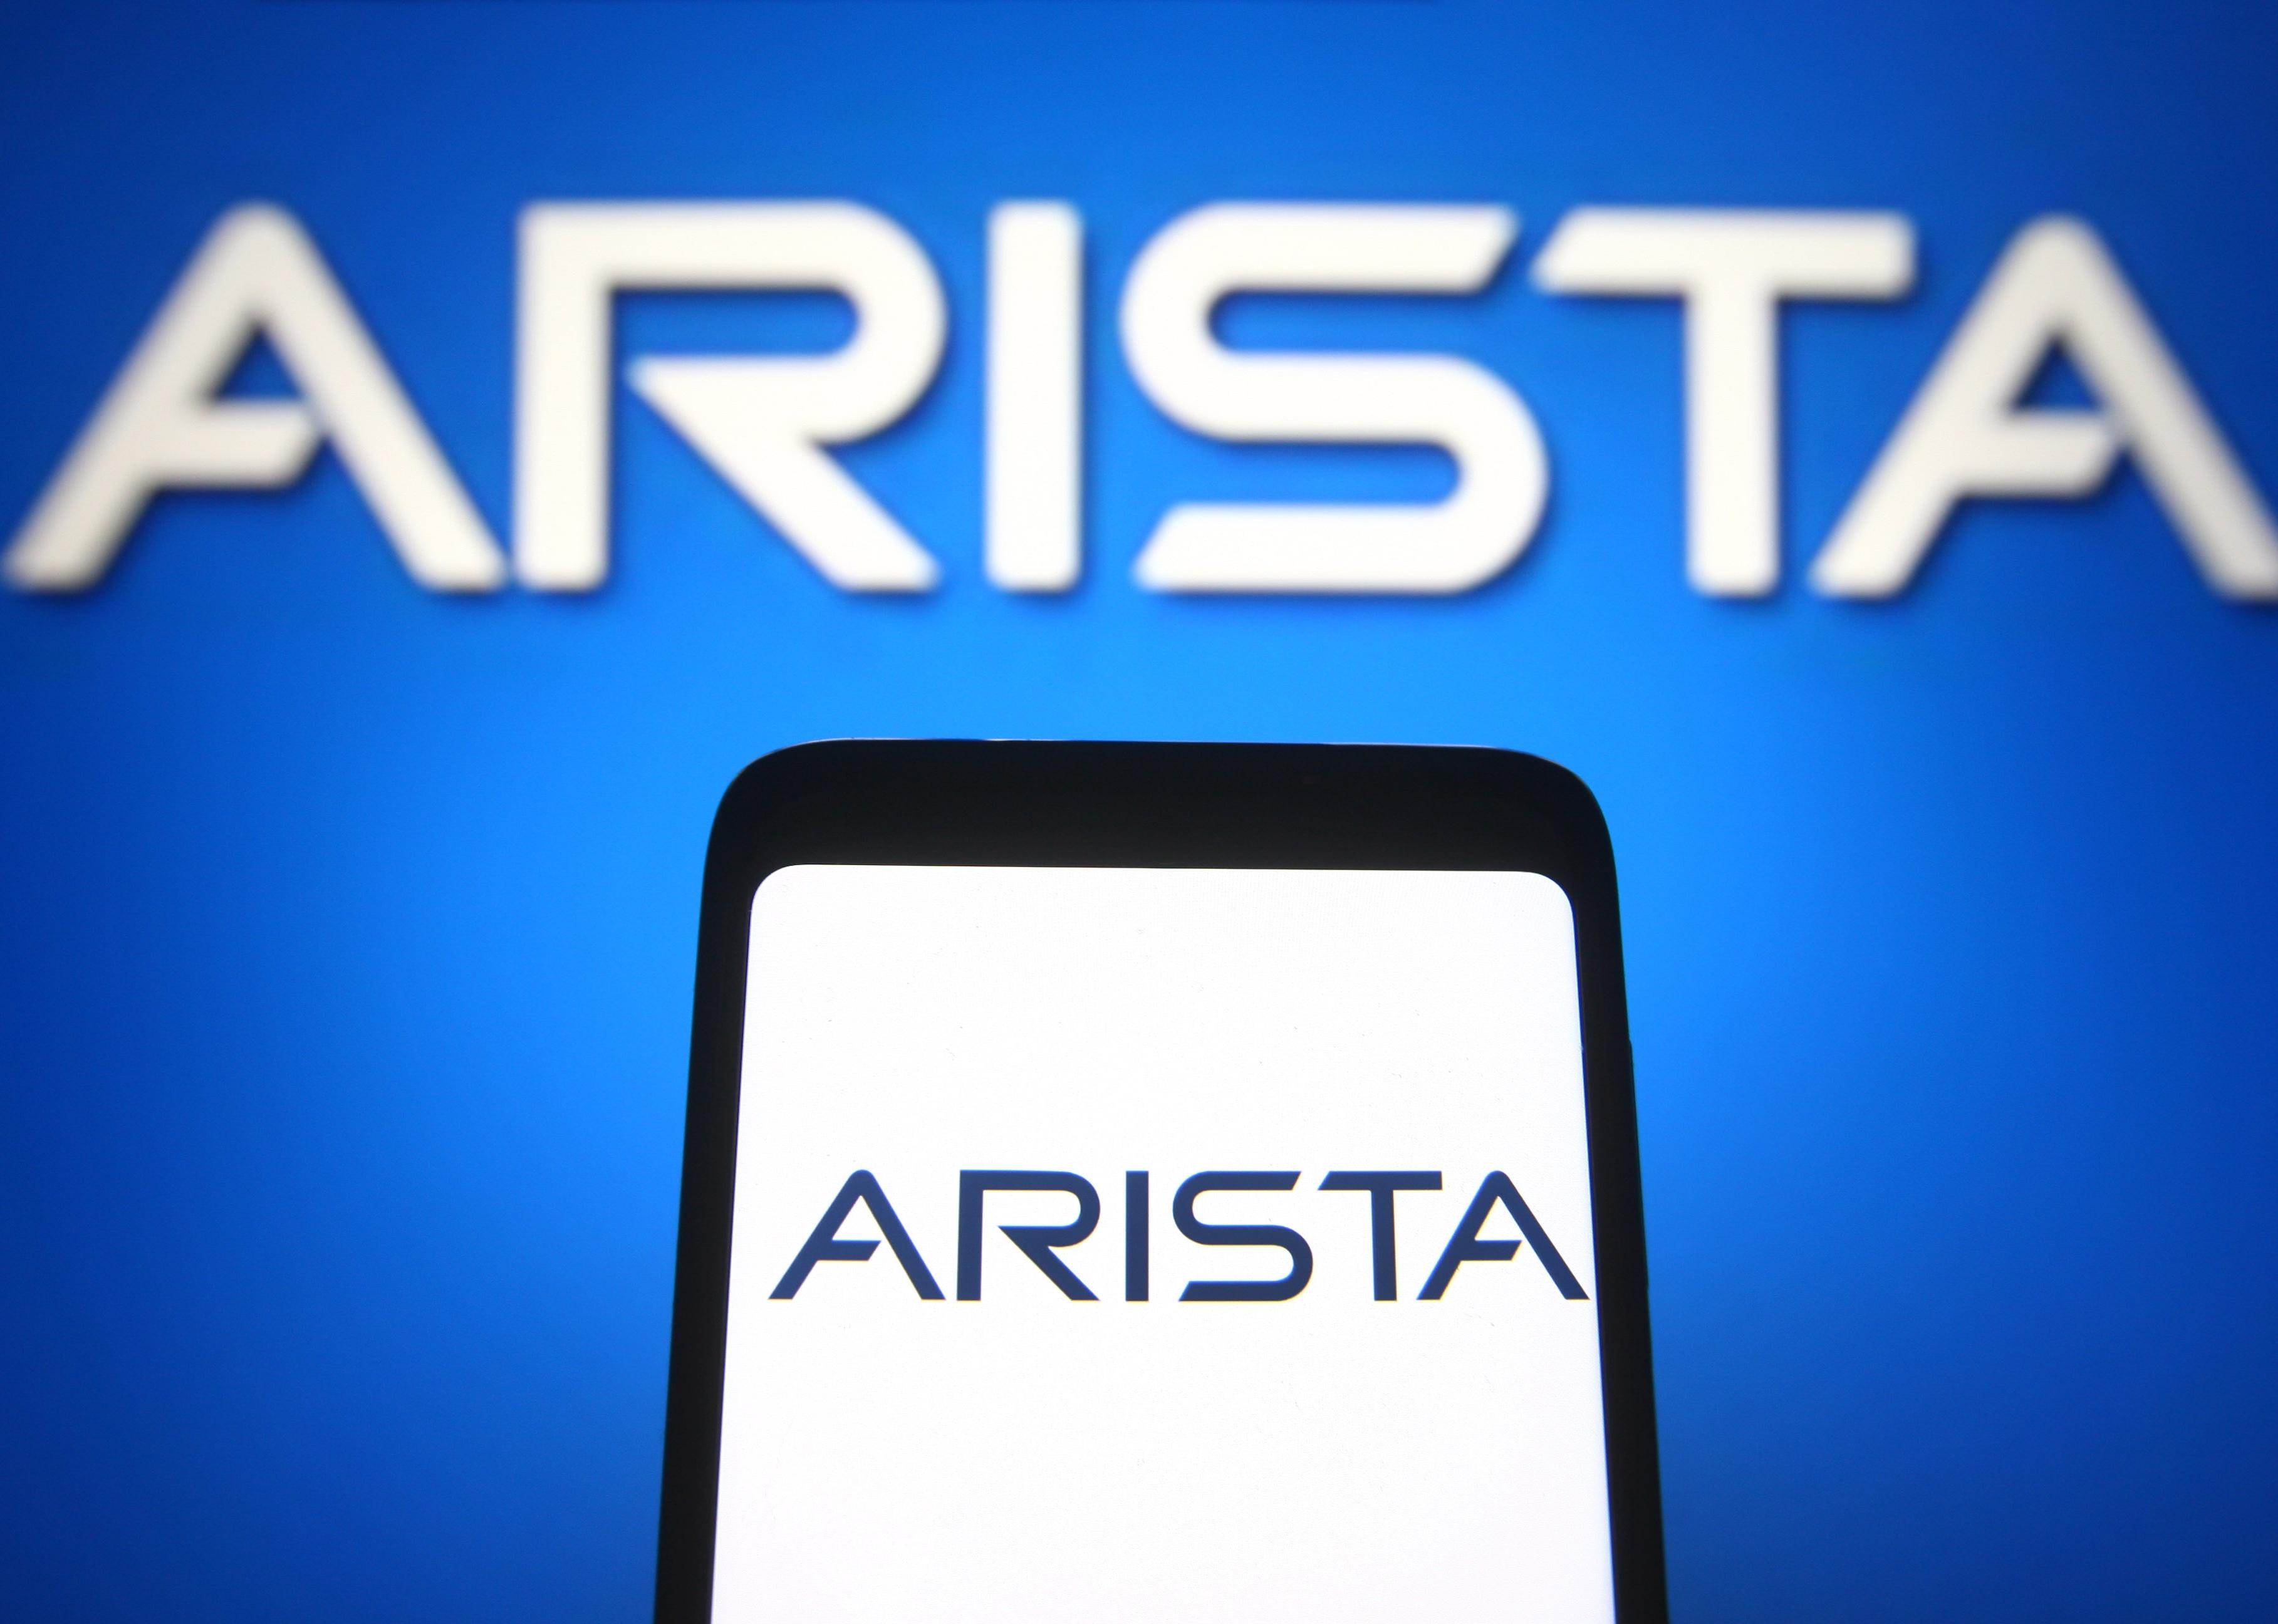 Arista Networks logo seen on a smartphone